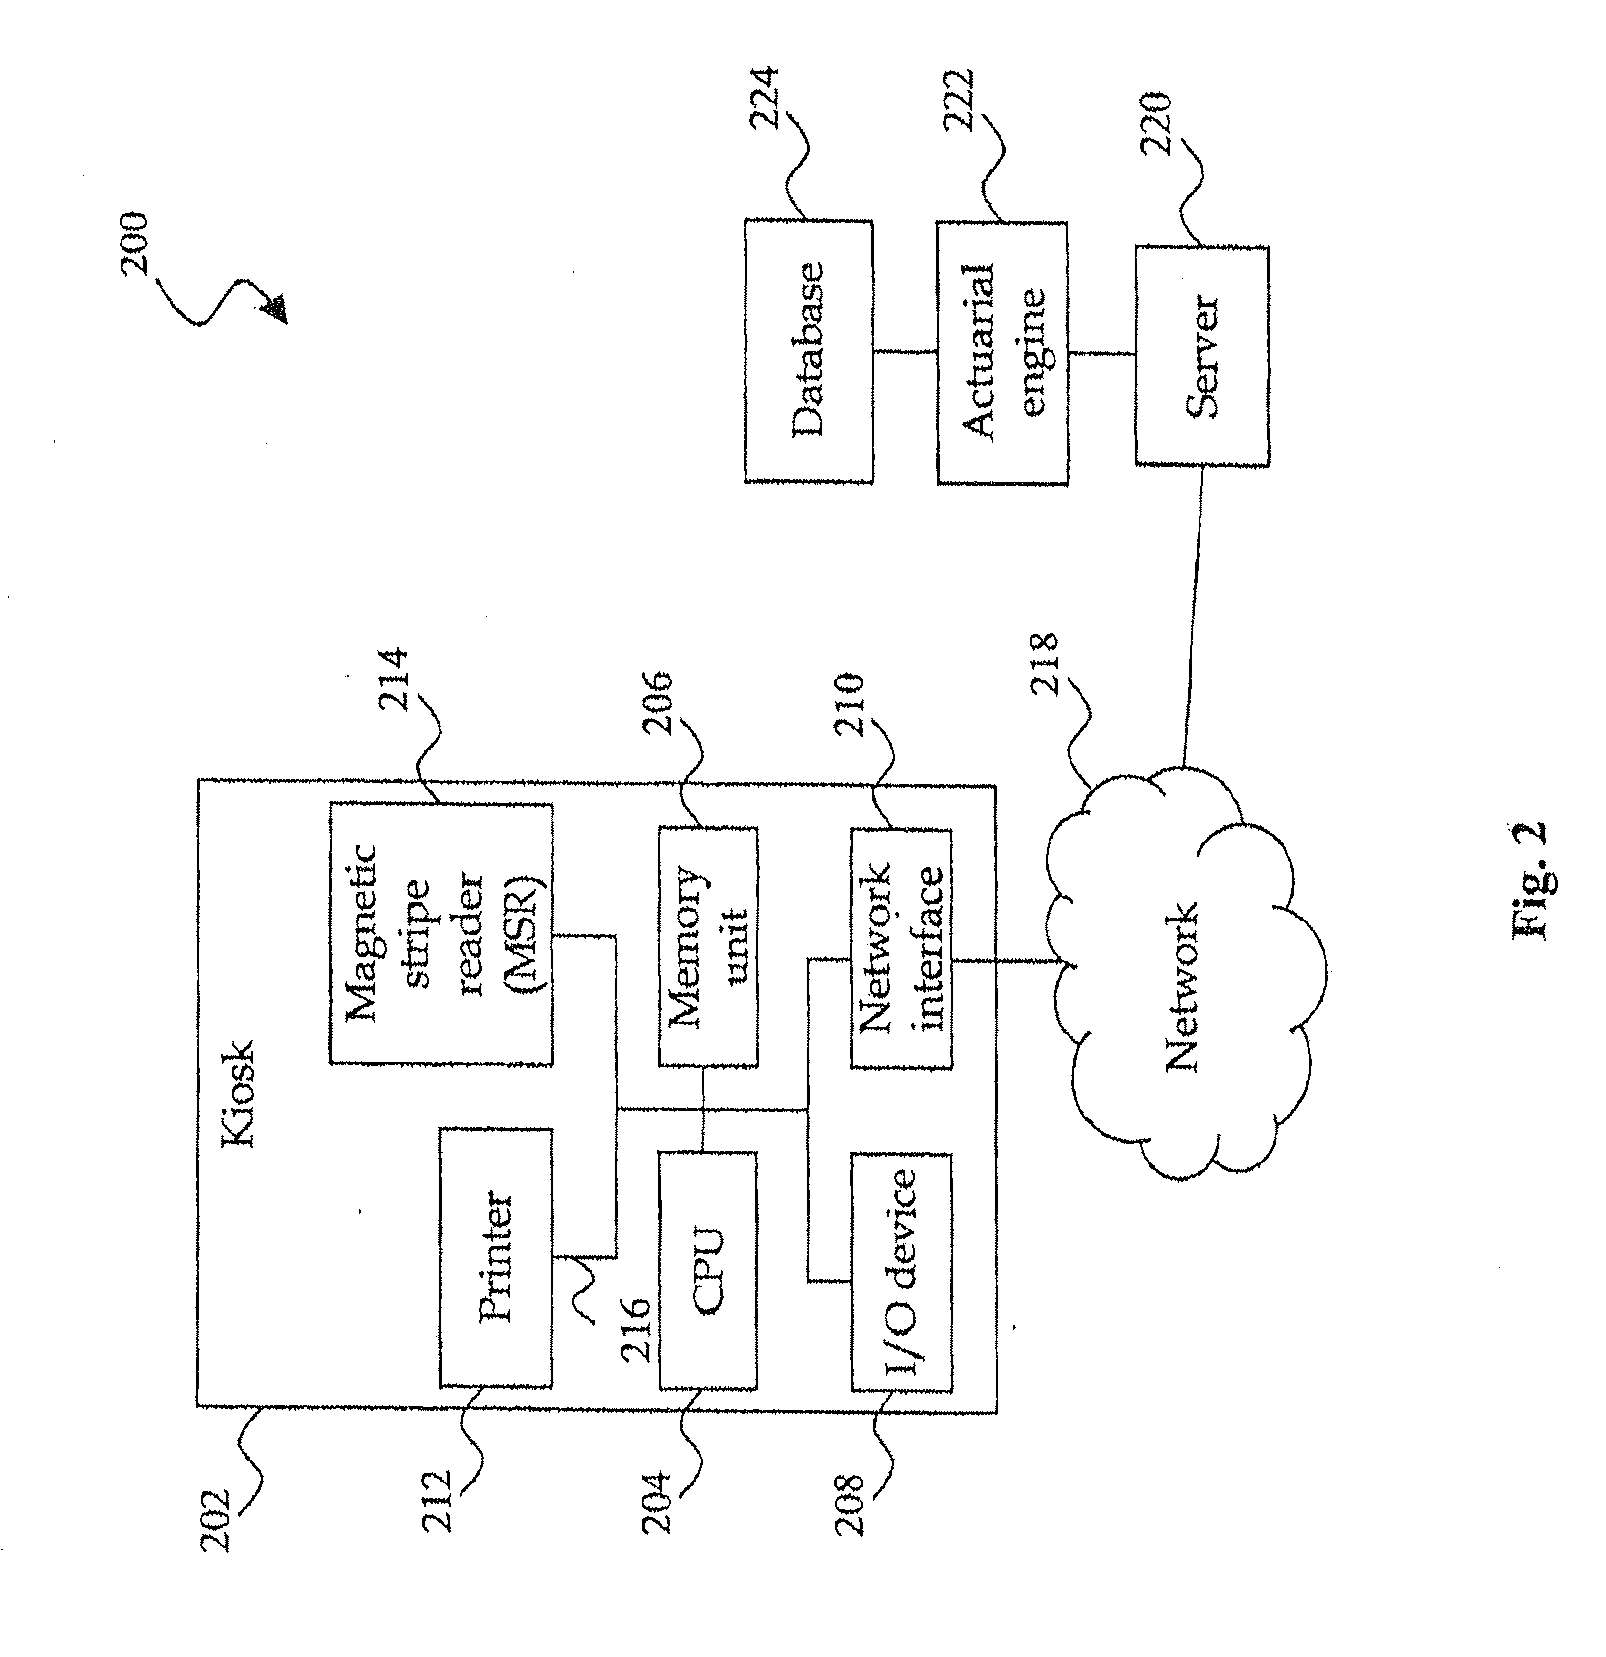 System and method for the assessment, pricing, and provisioning of distance-based vehicle insurance